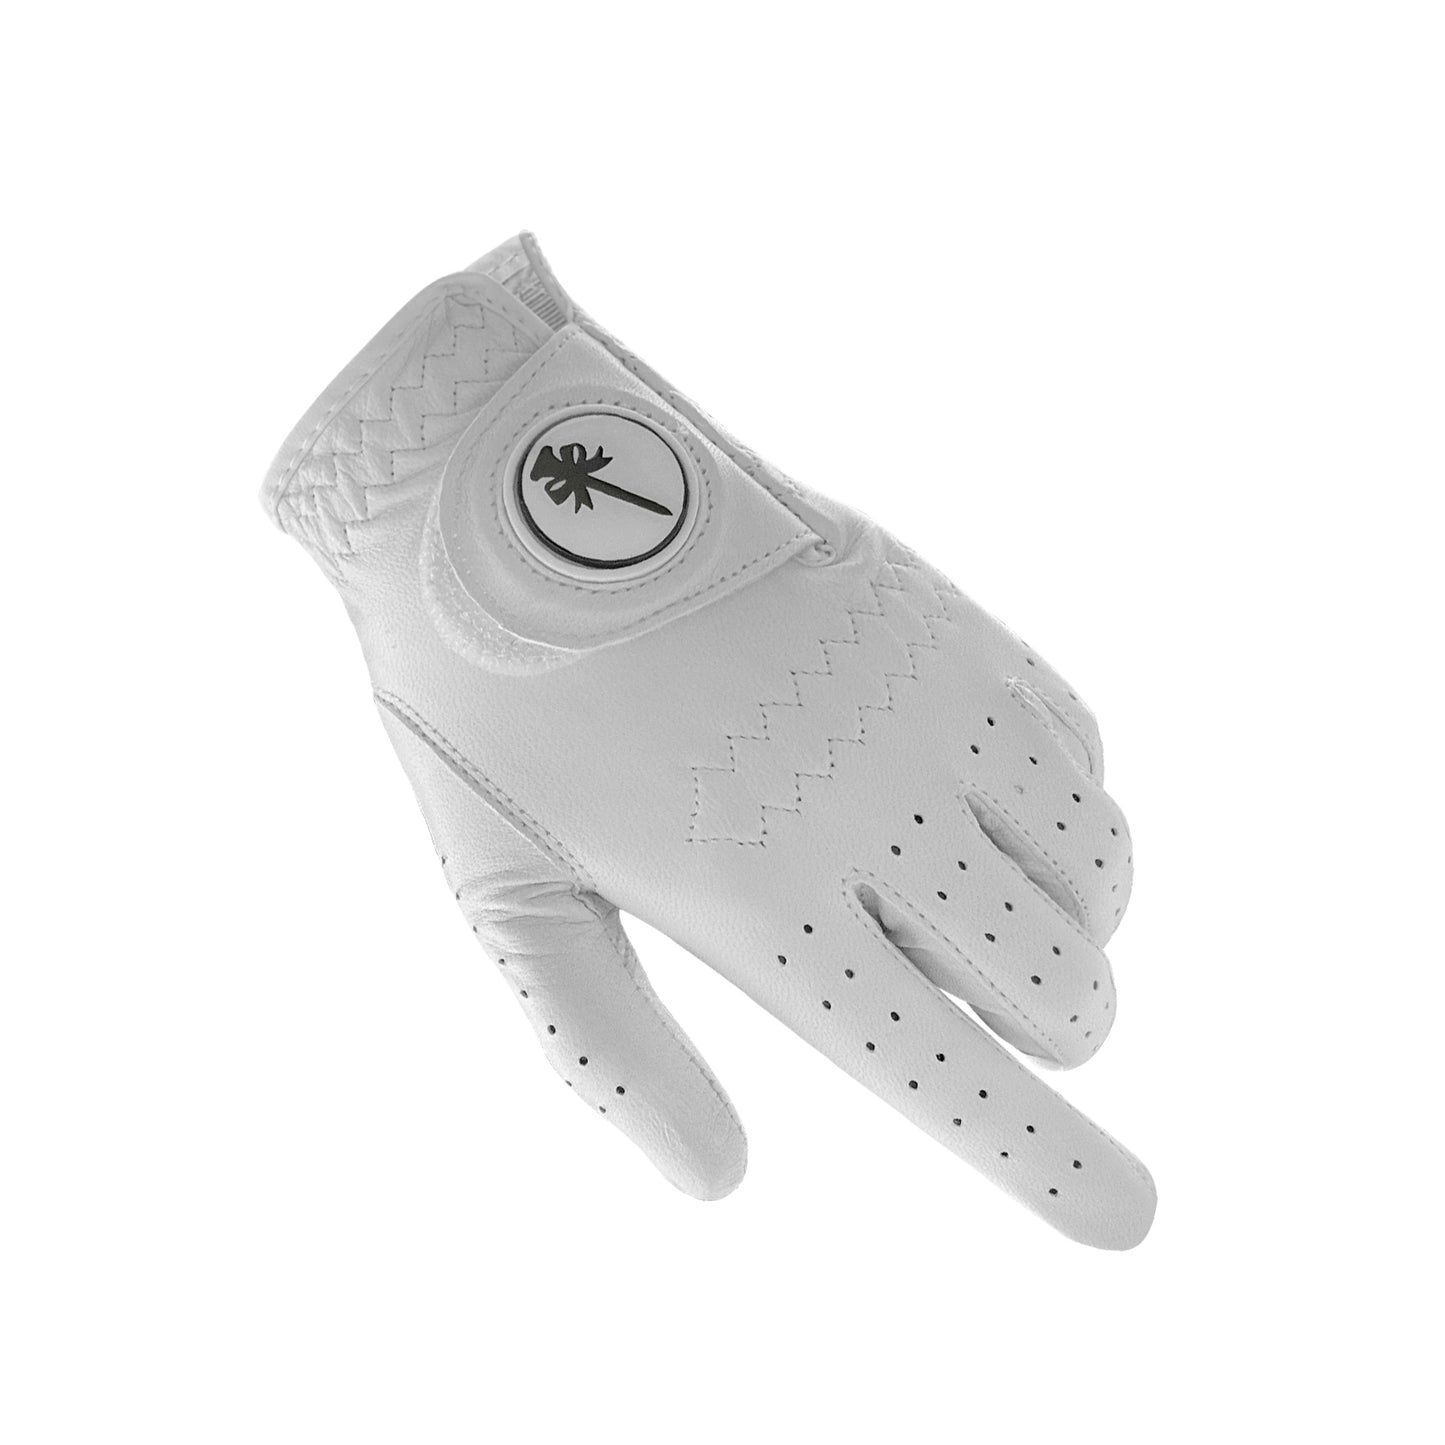 PINKTEE Golf Glove Women Left Hand Cabretta Leather with Ball Marker Adjustable Full Finger Fit Size S M L XL